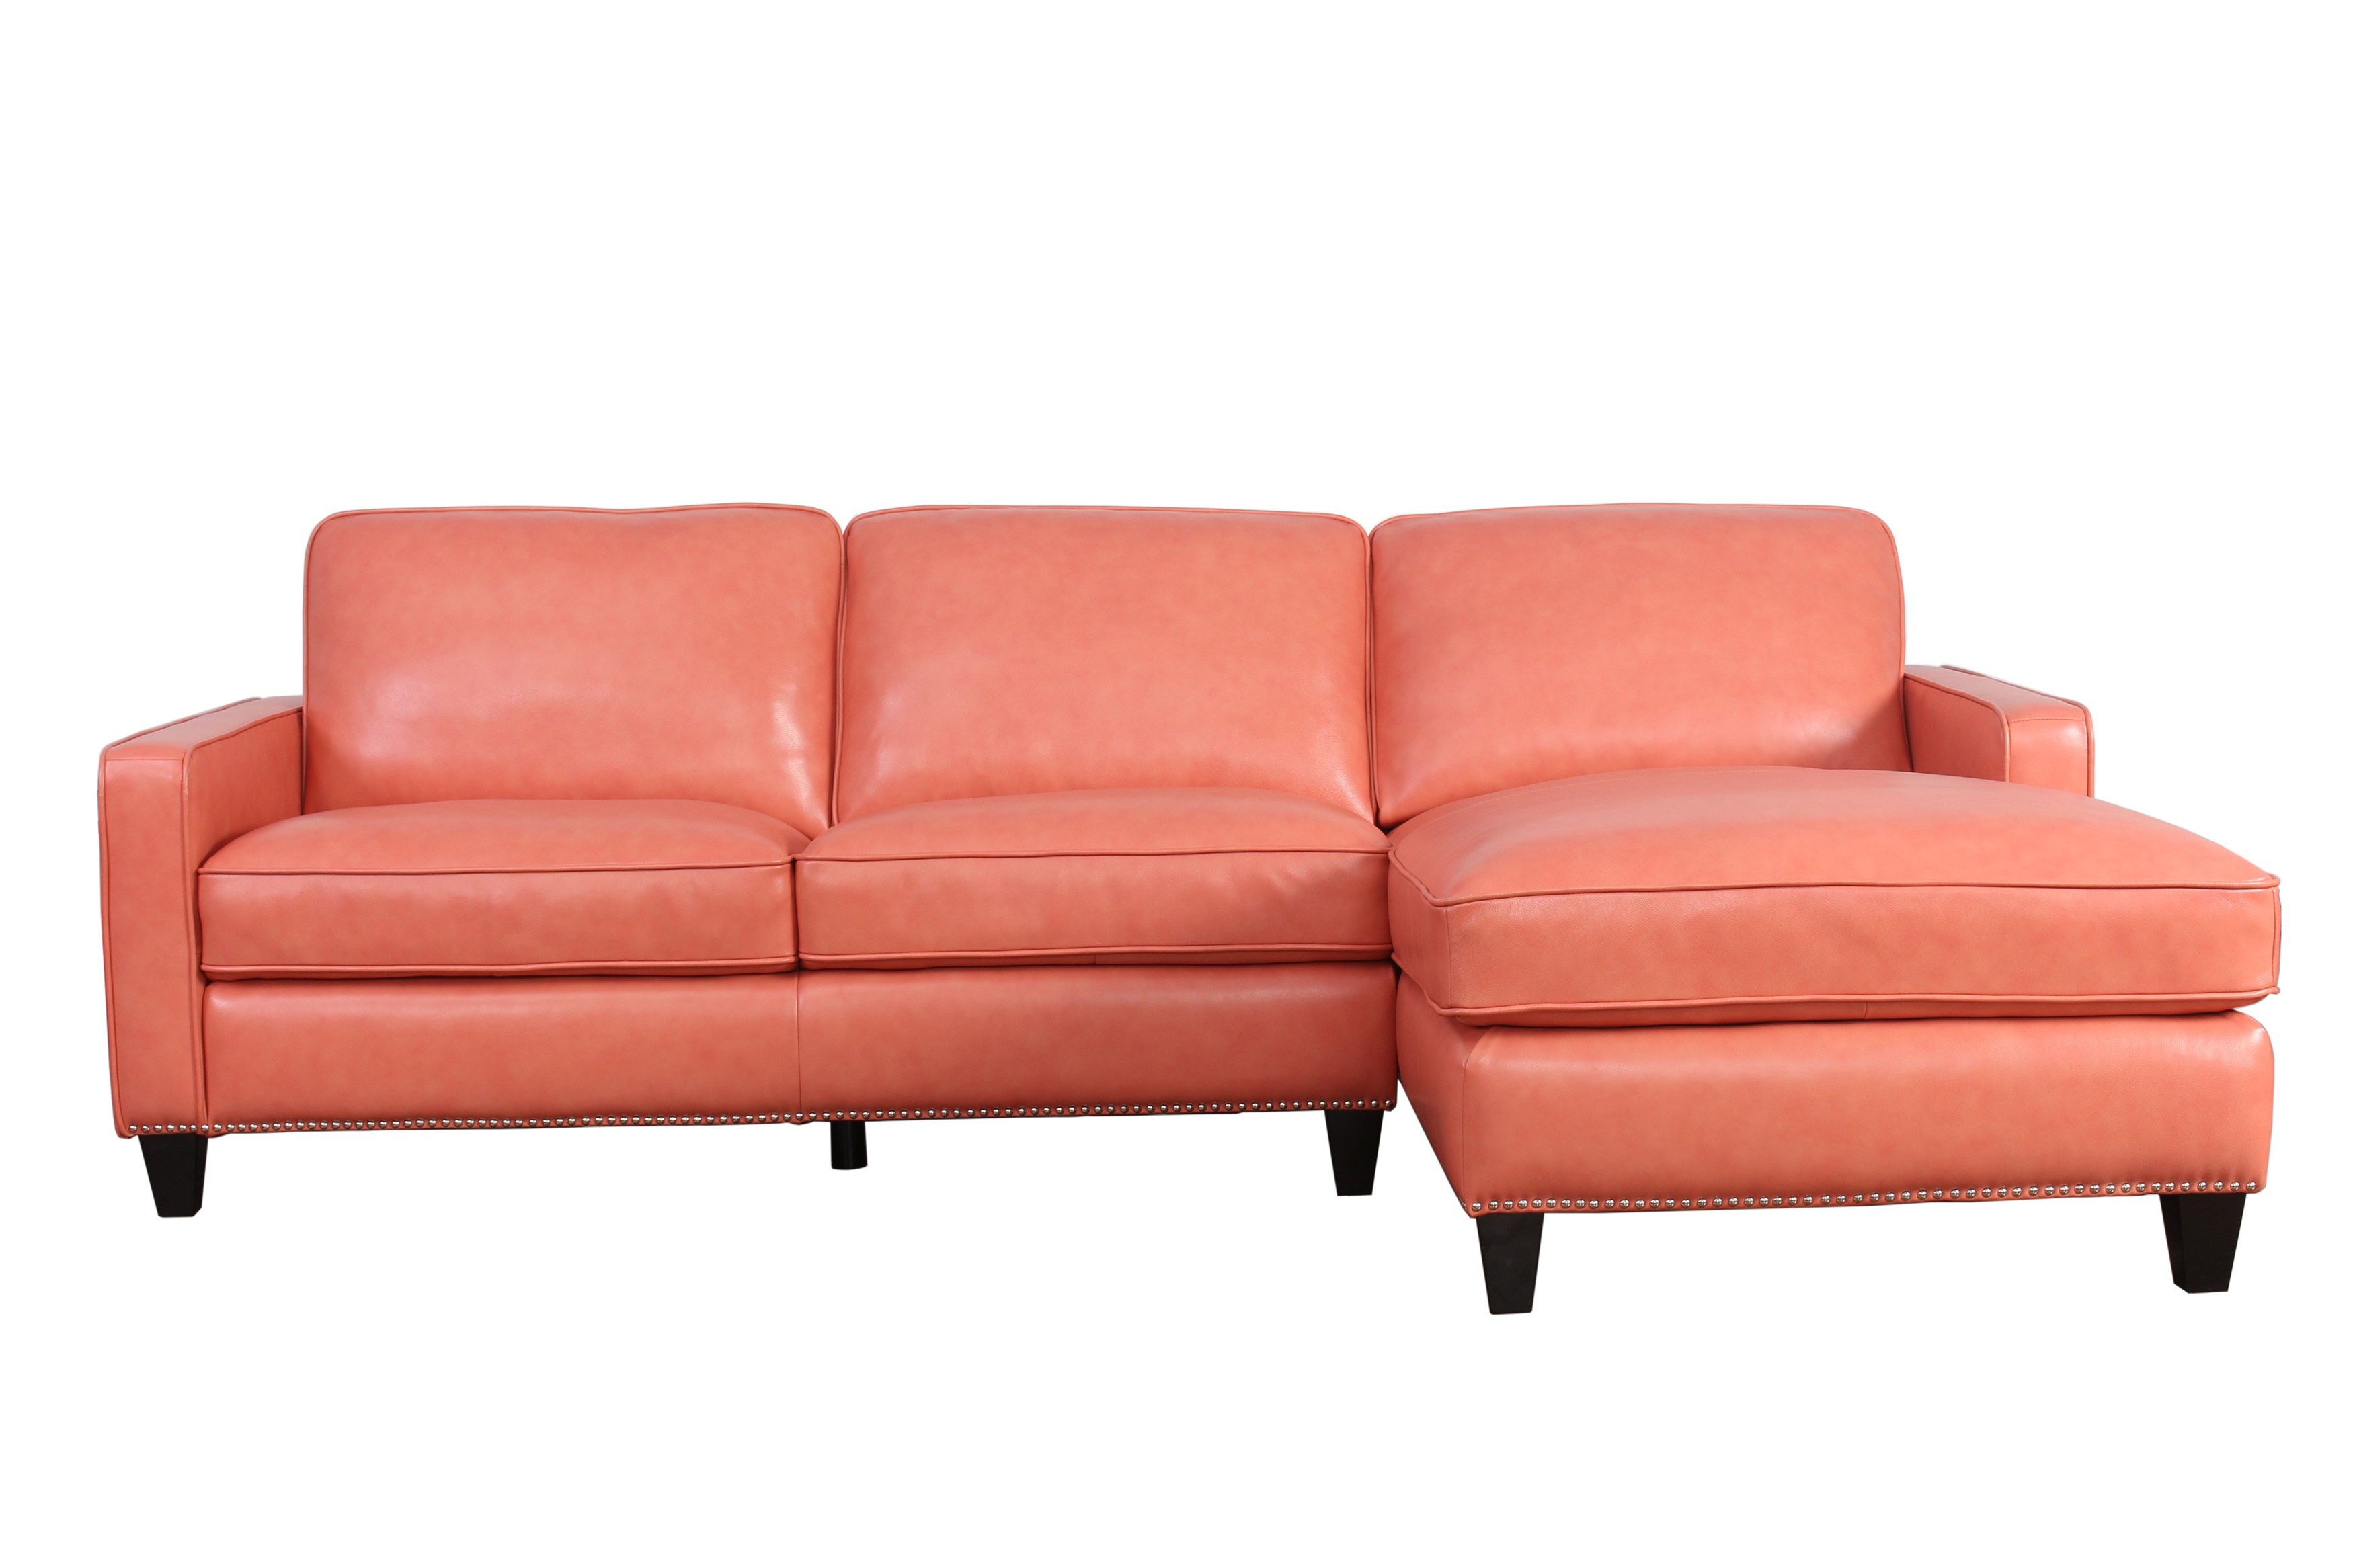 Abbyson Living leather sectional salmon